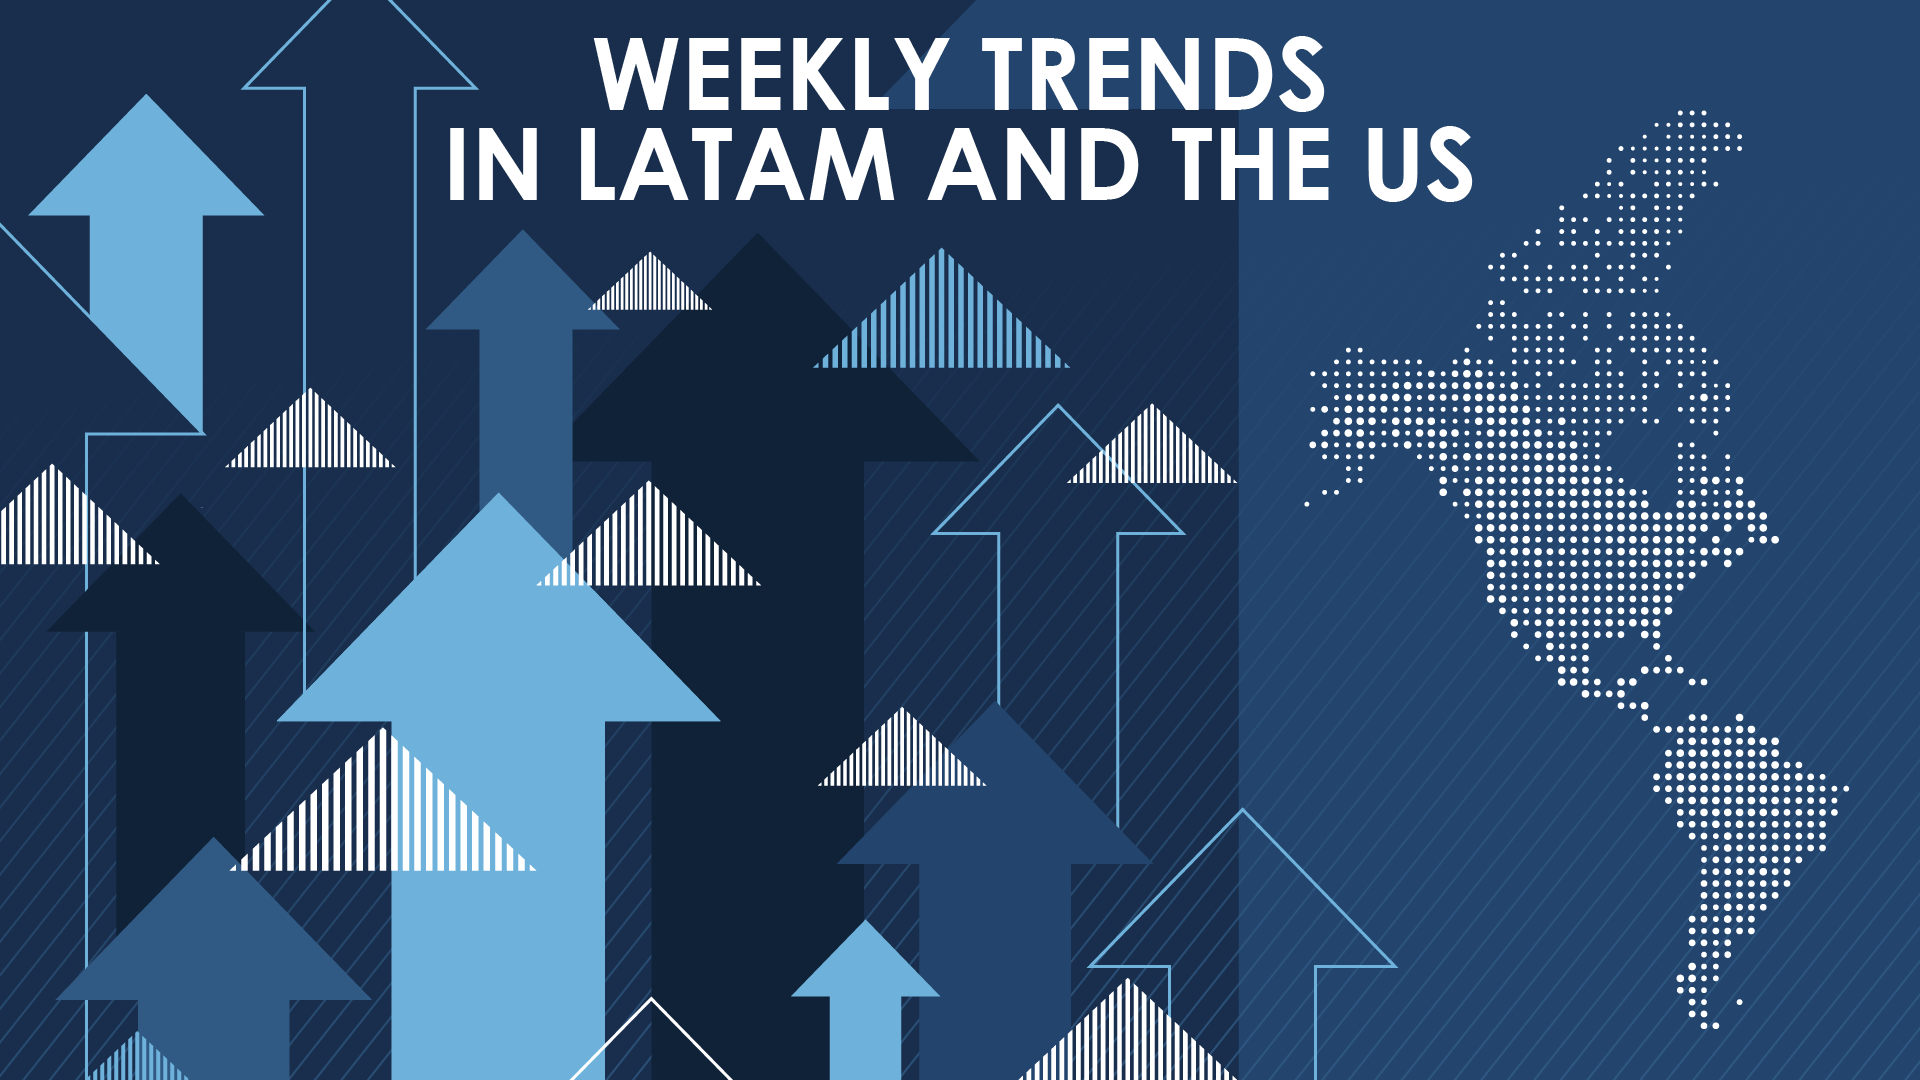 LatAm and US weekly trends